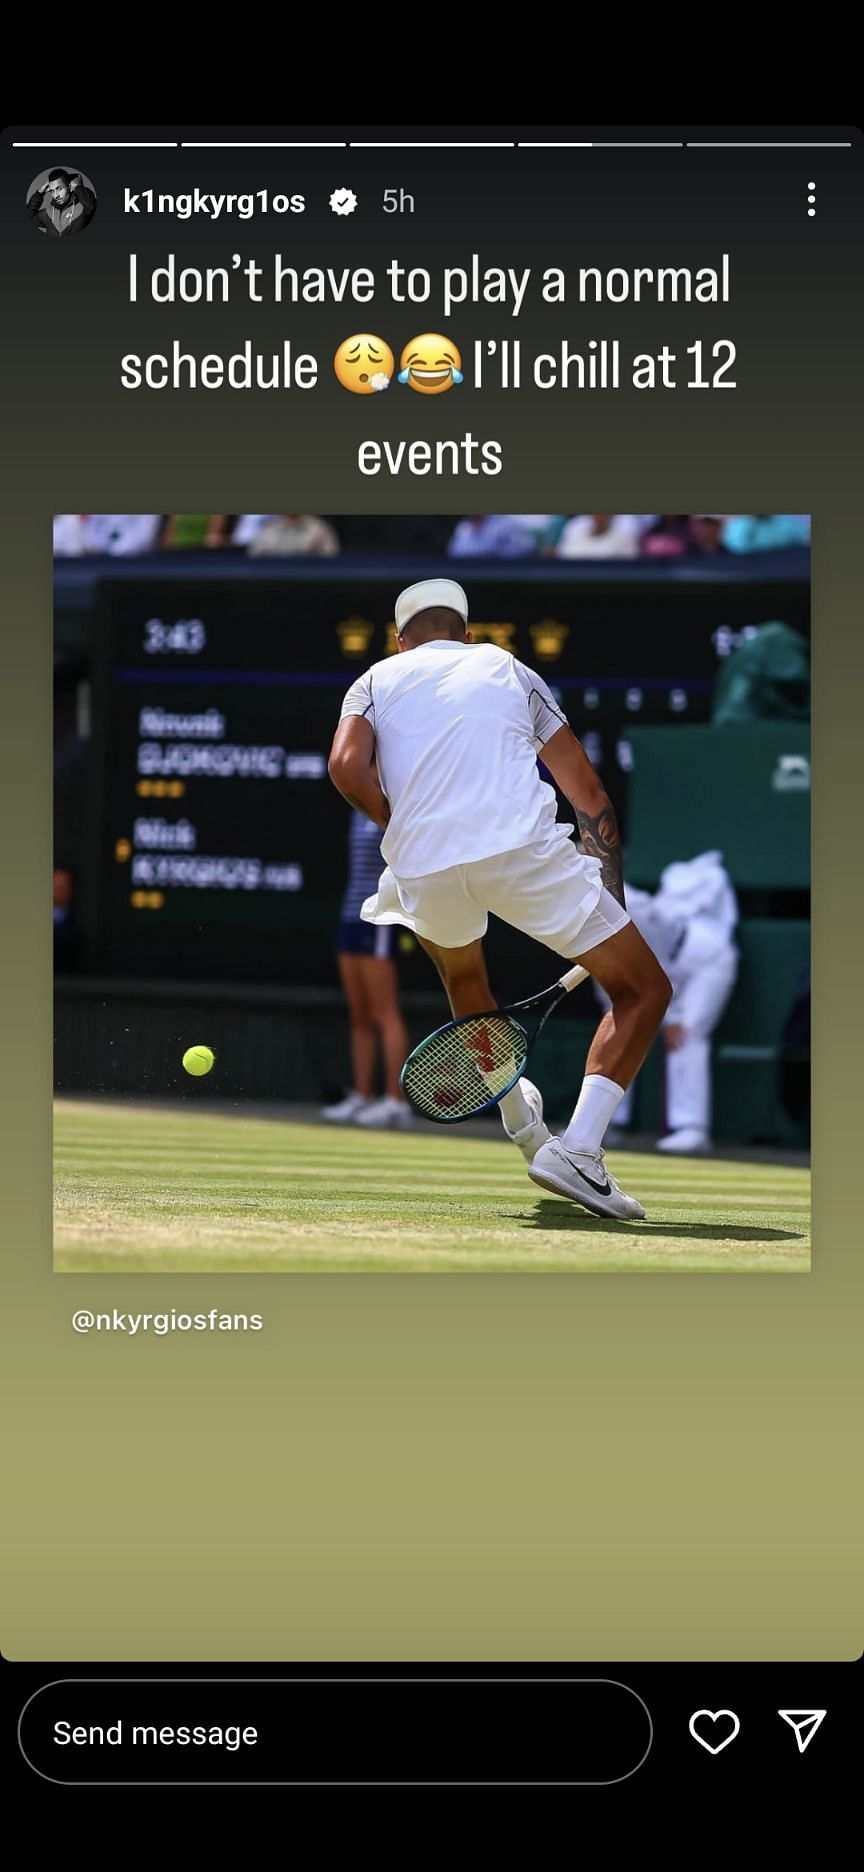 Nick Kyrgios comments on his playing schedule